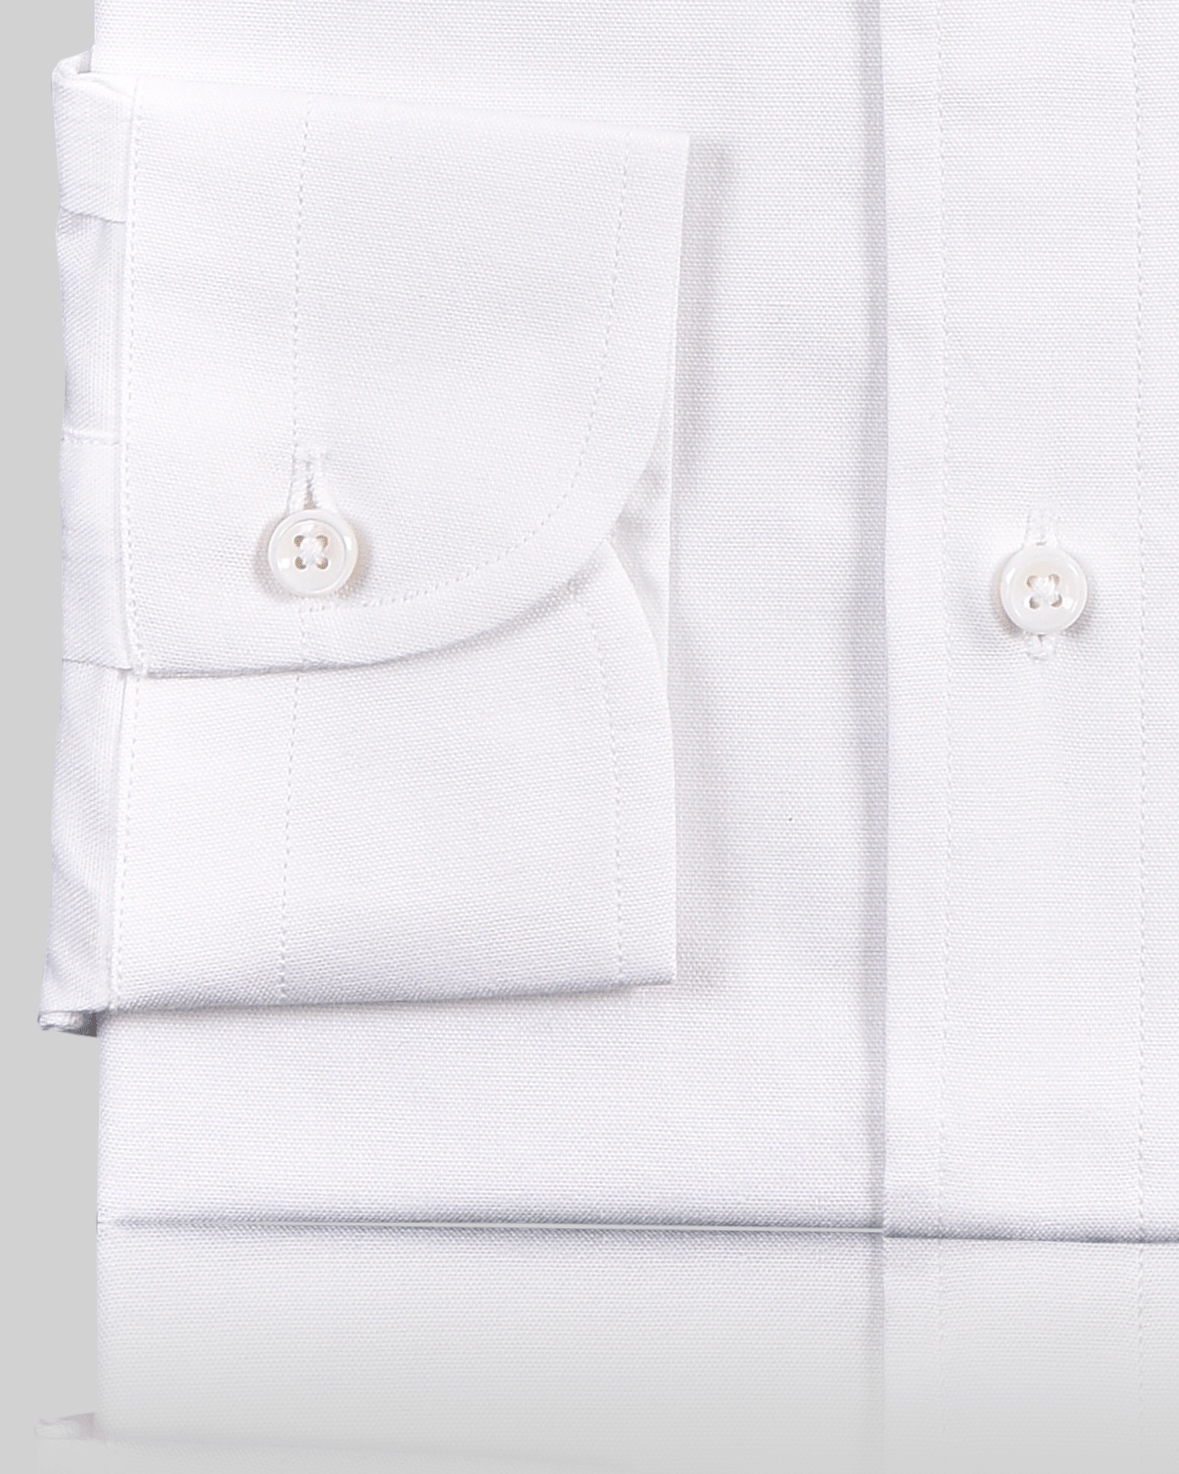 Cuff of the custom oxford shirt for men by Luxire in pinpoint white